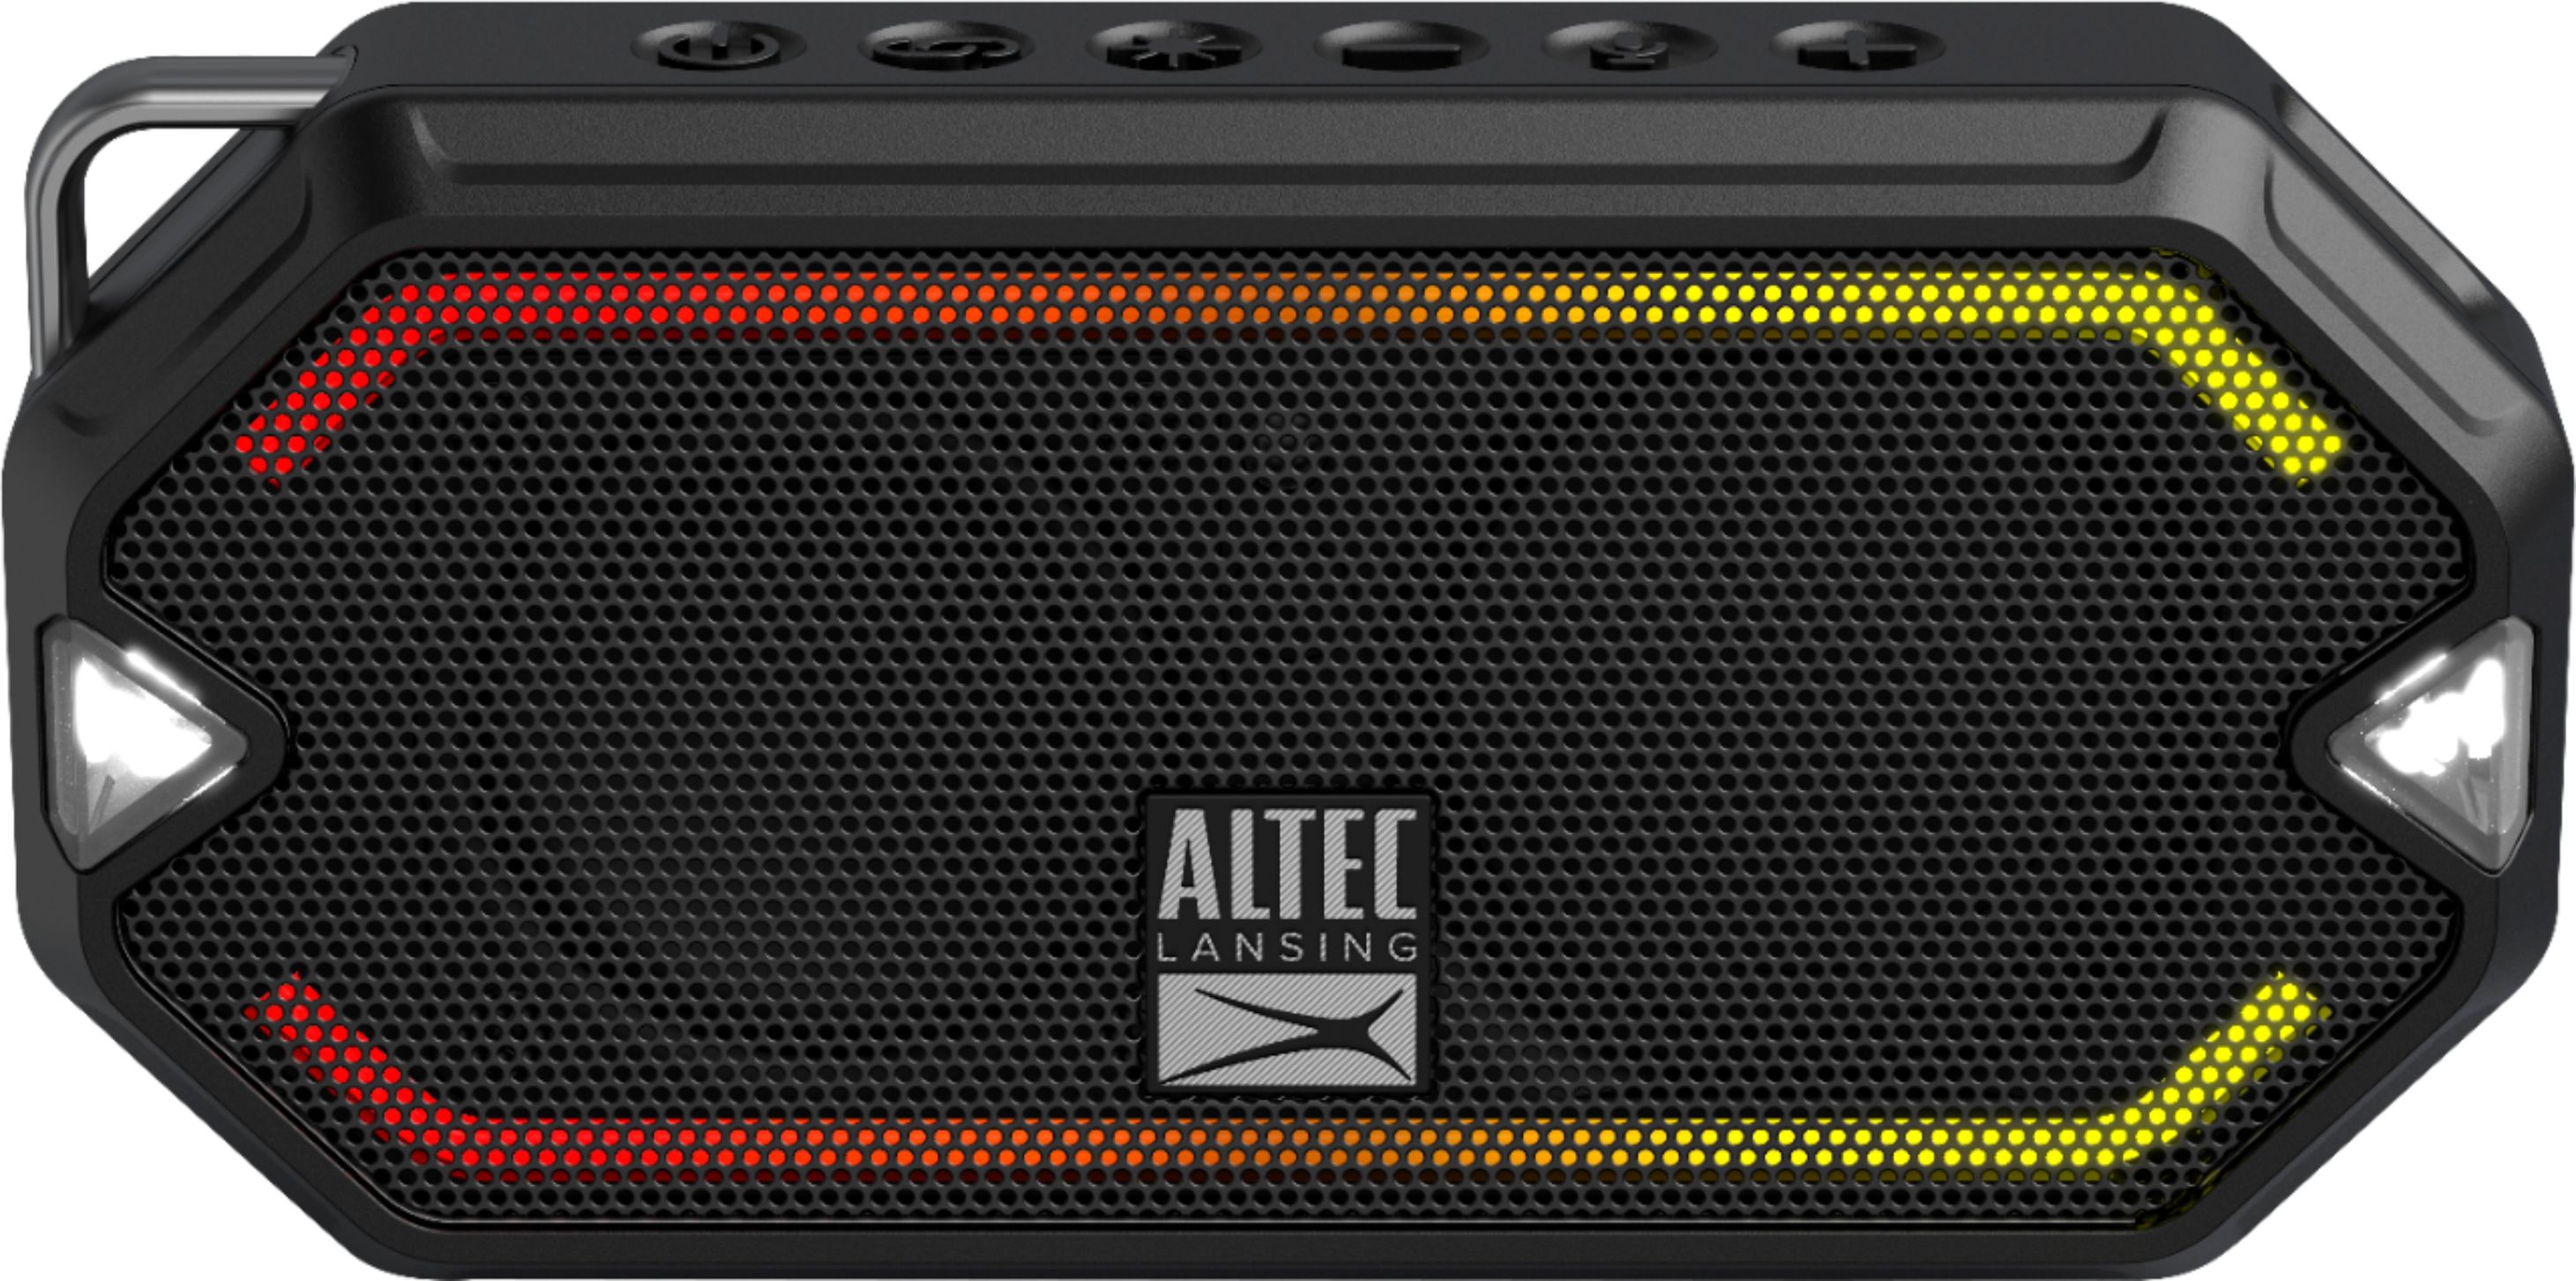 How to Pair Altec Lansing Speakers Together 